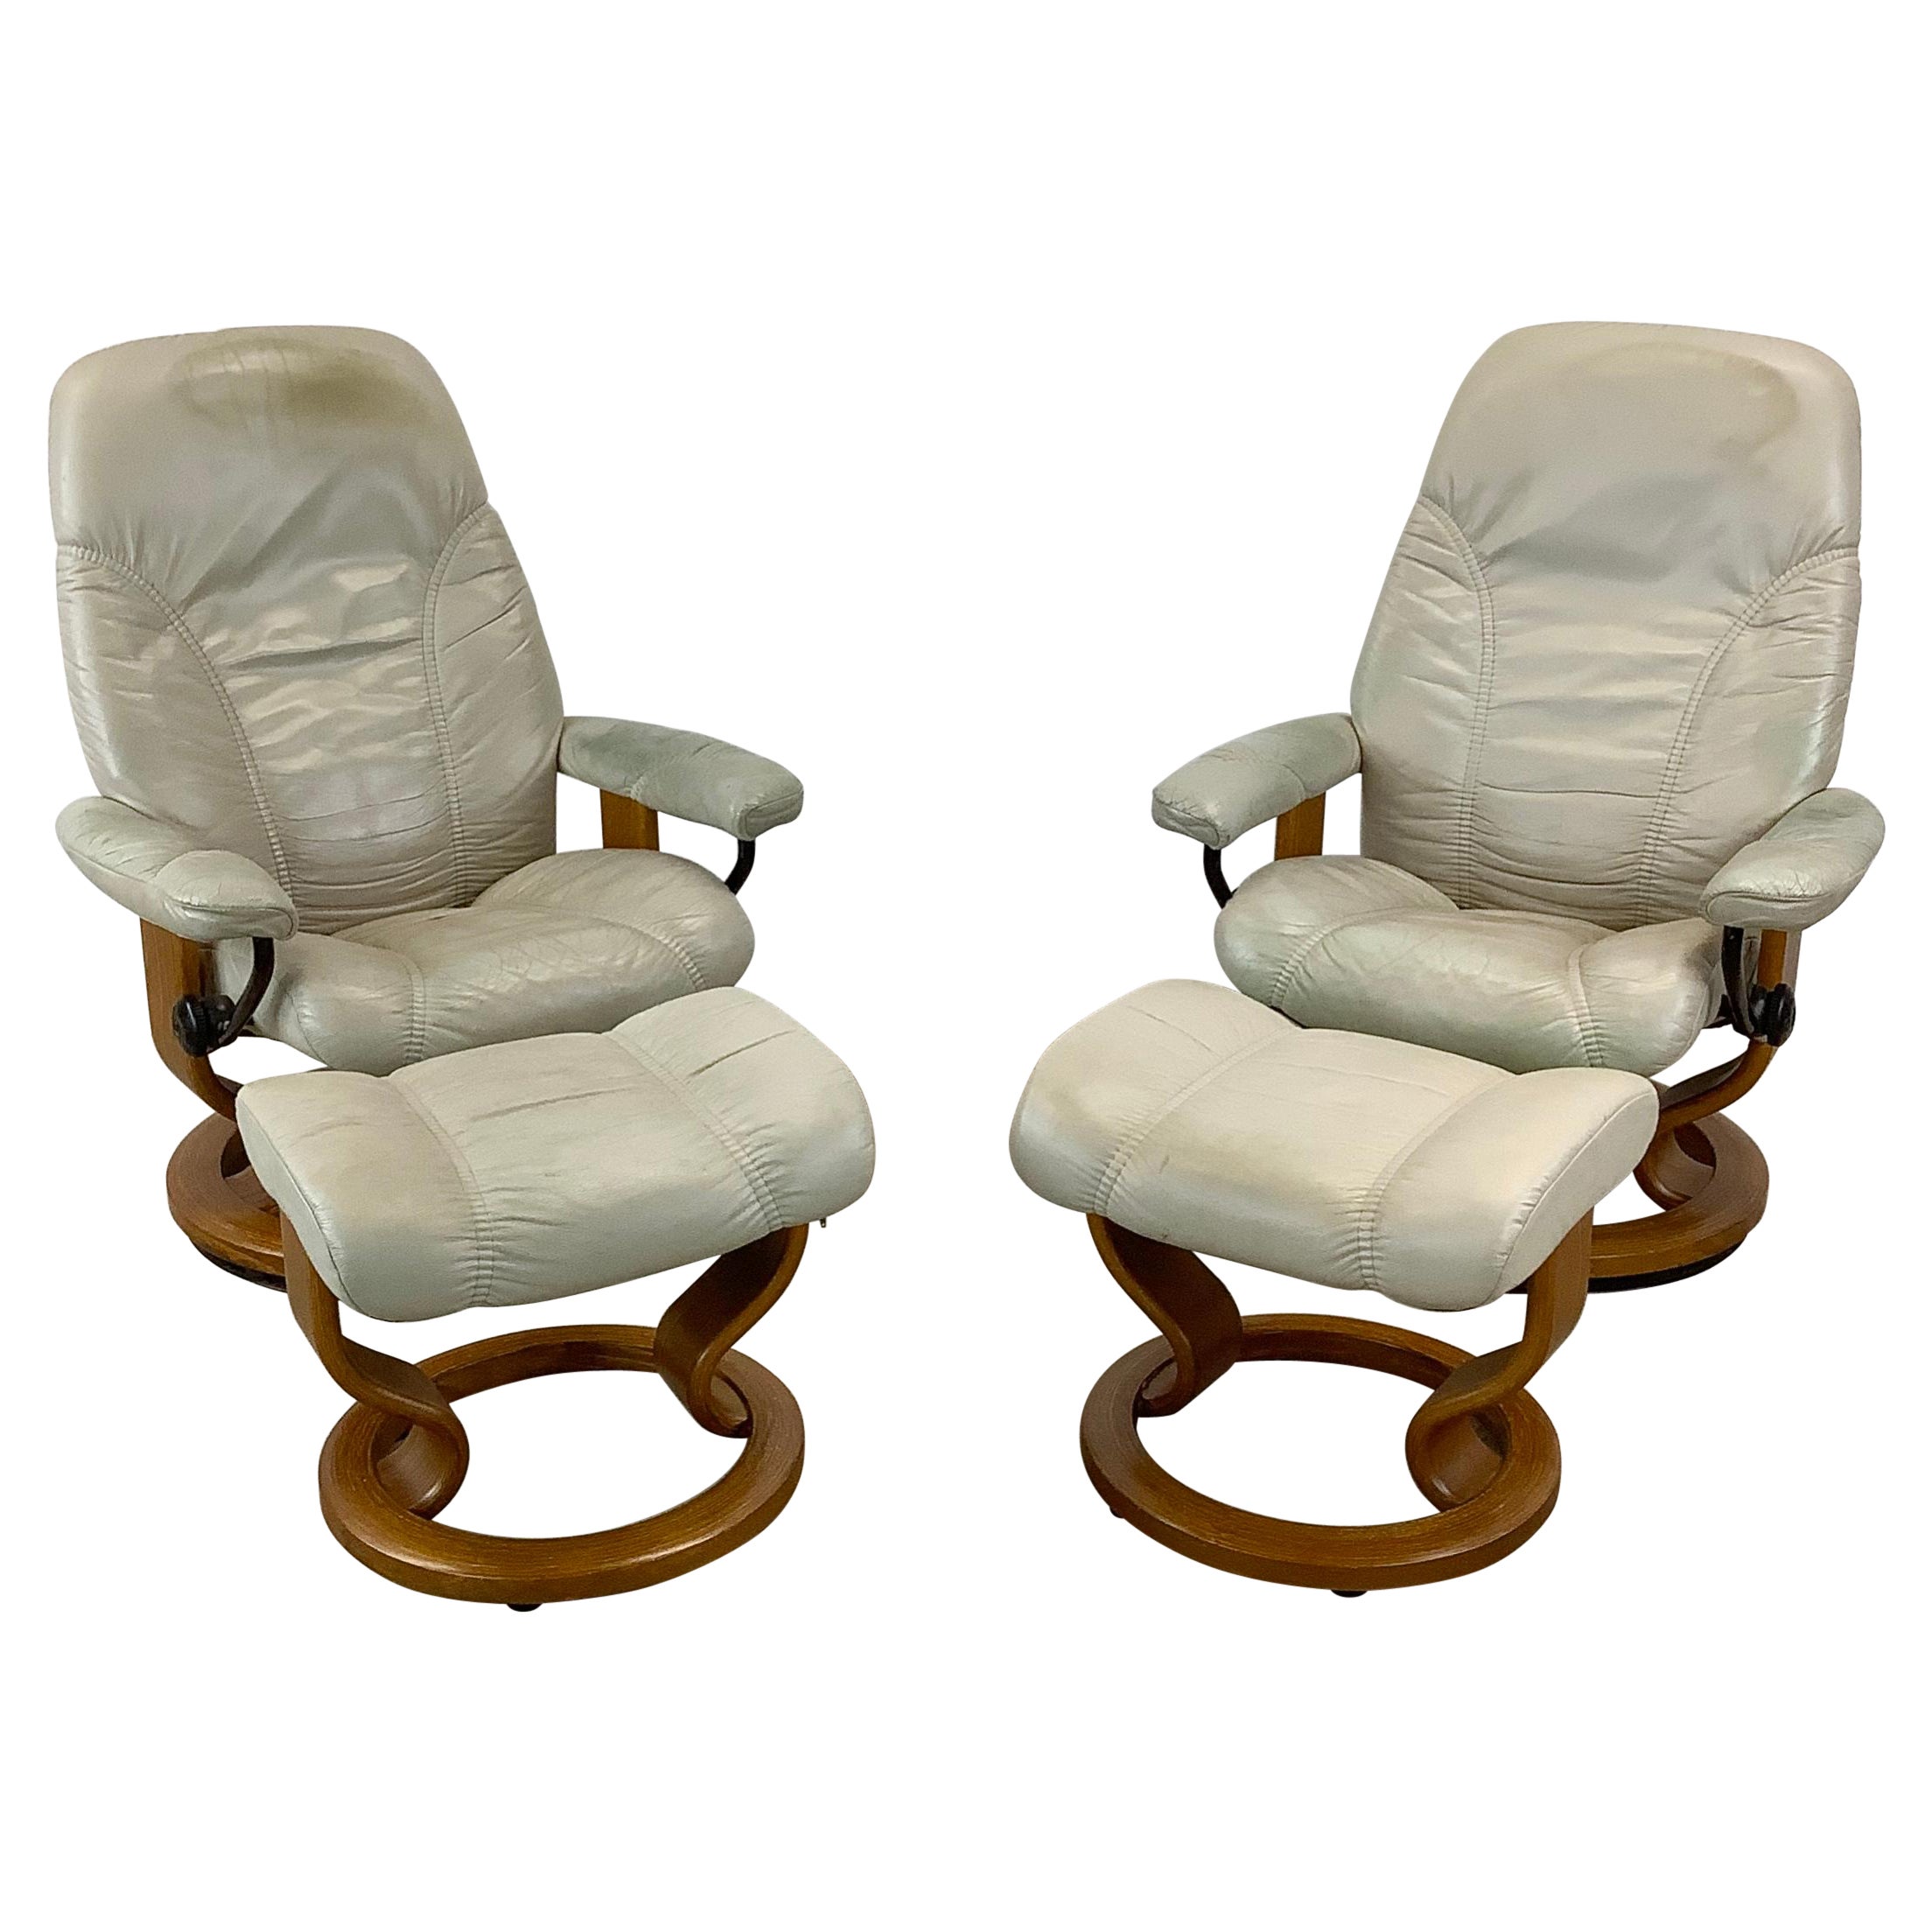 Pair Ekornes Stressless Swivel Chairs with Ottoman